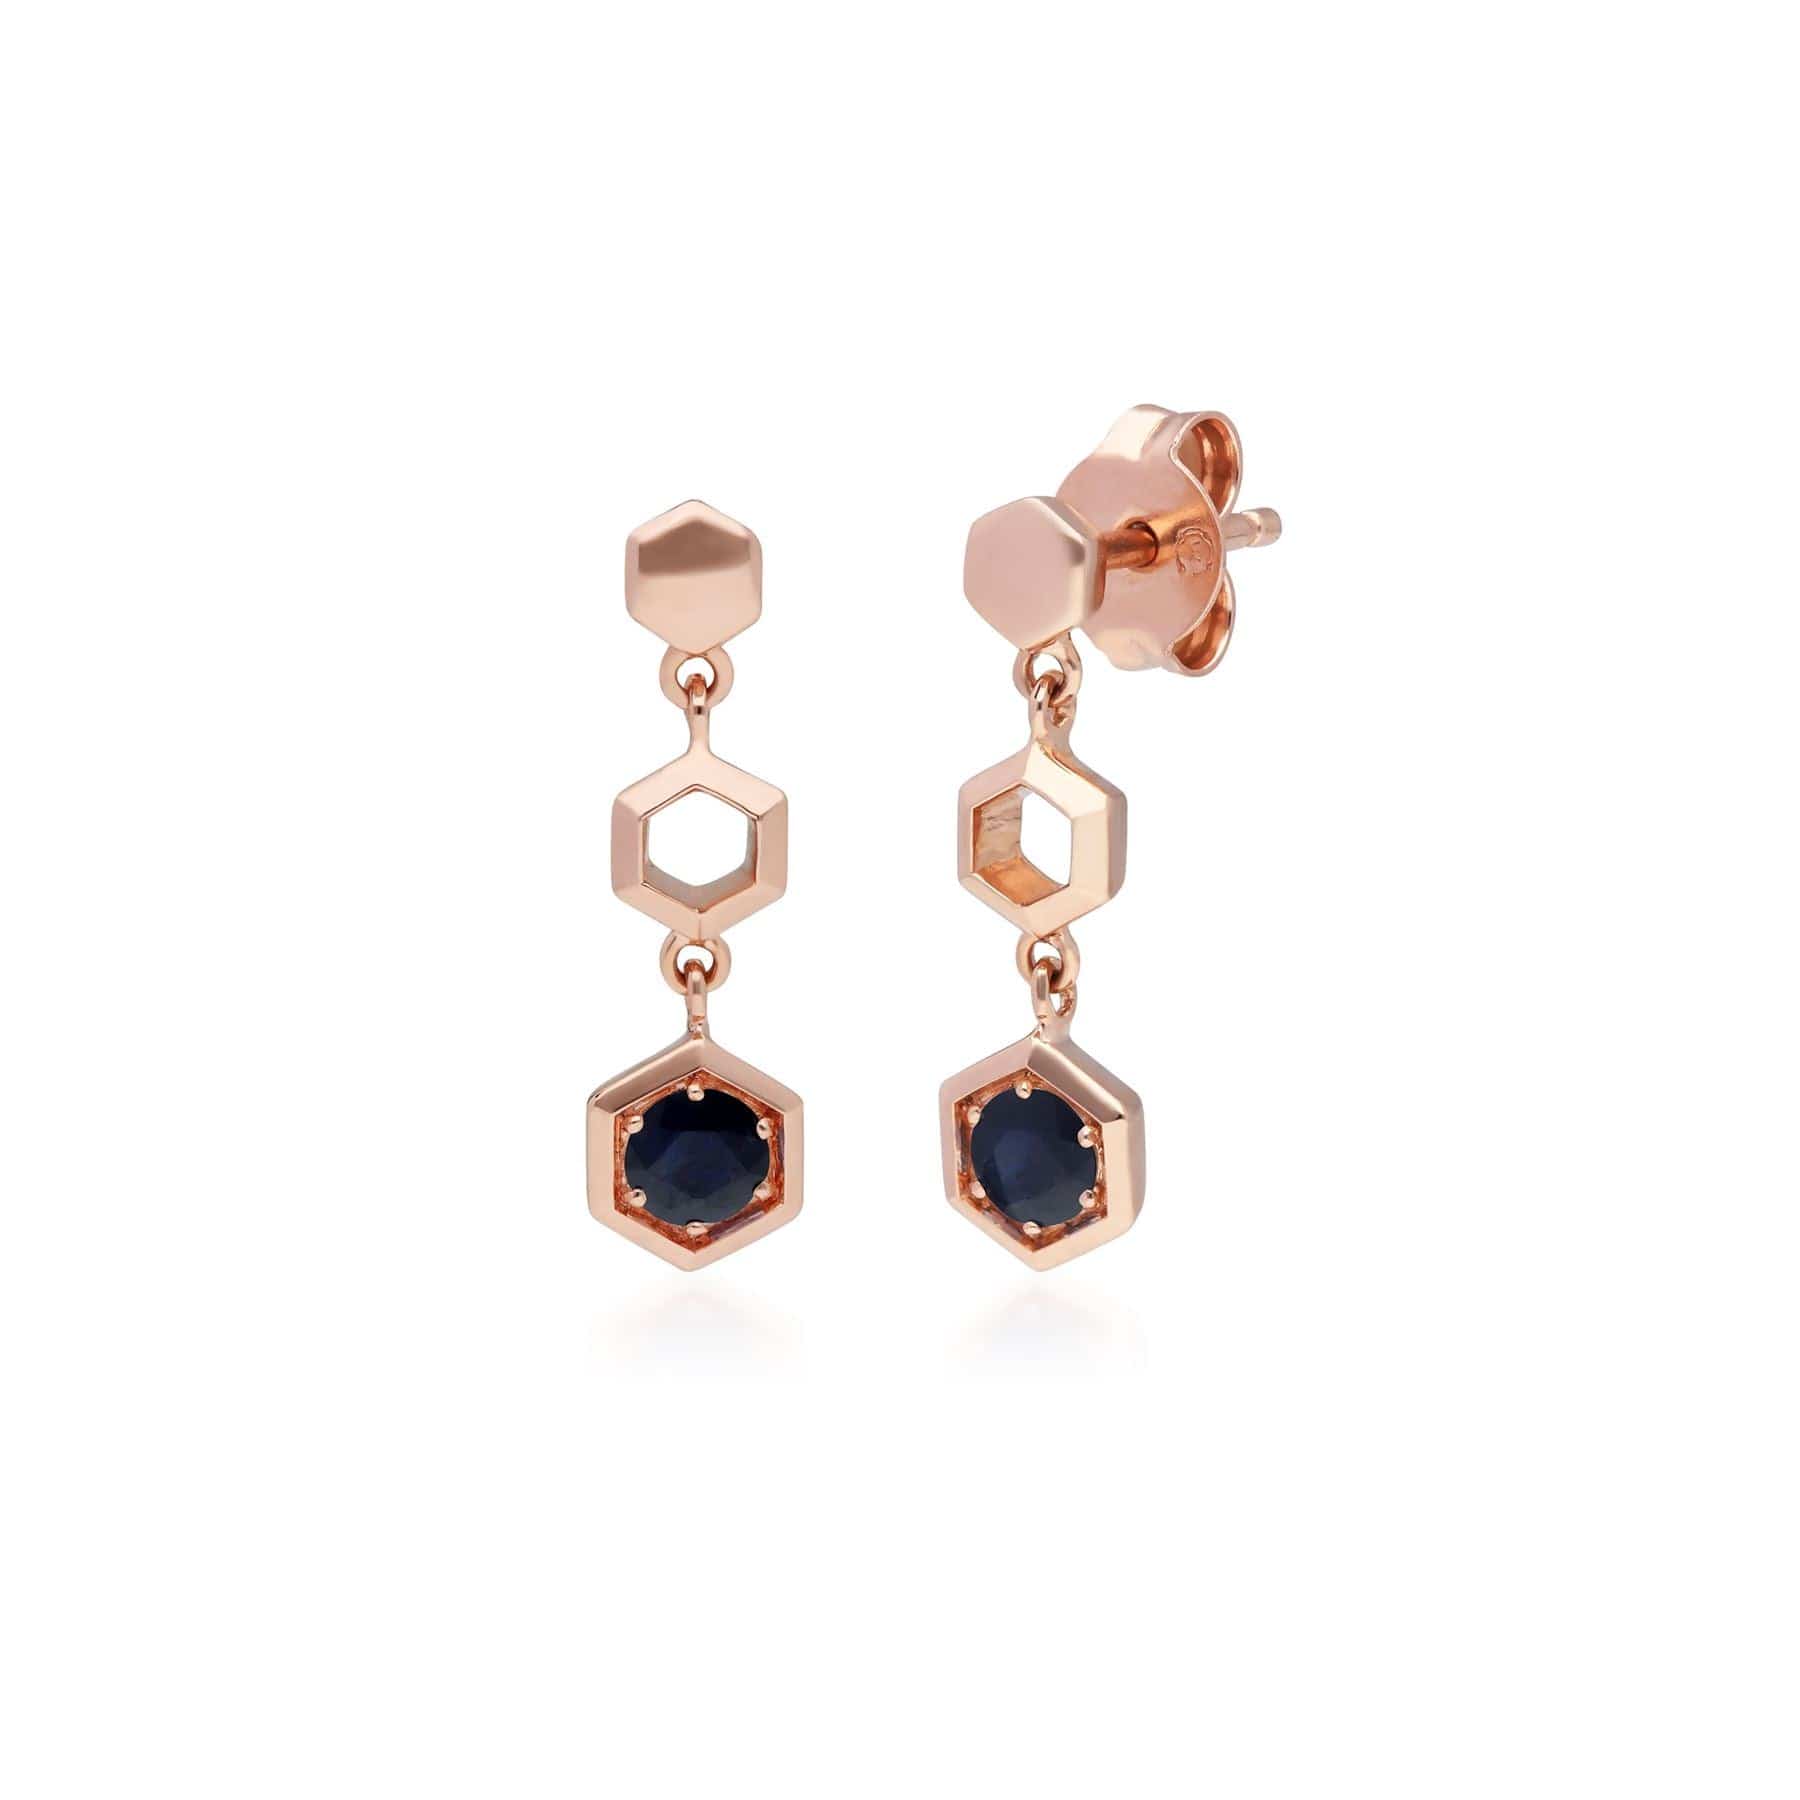 Image of Honeycomb Inspired Blue Sapphire Drop Earrings in 9ct Rose Gold